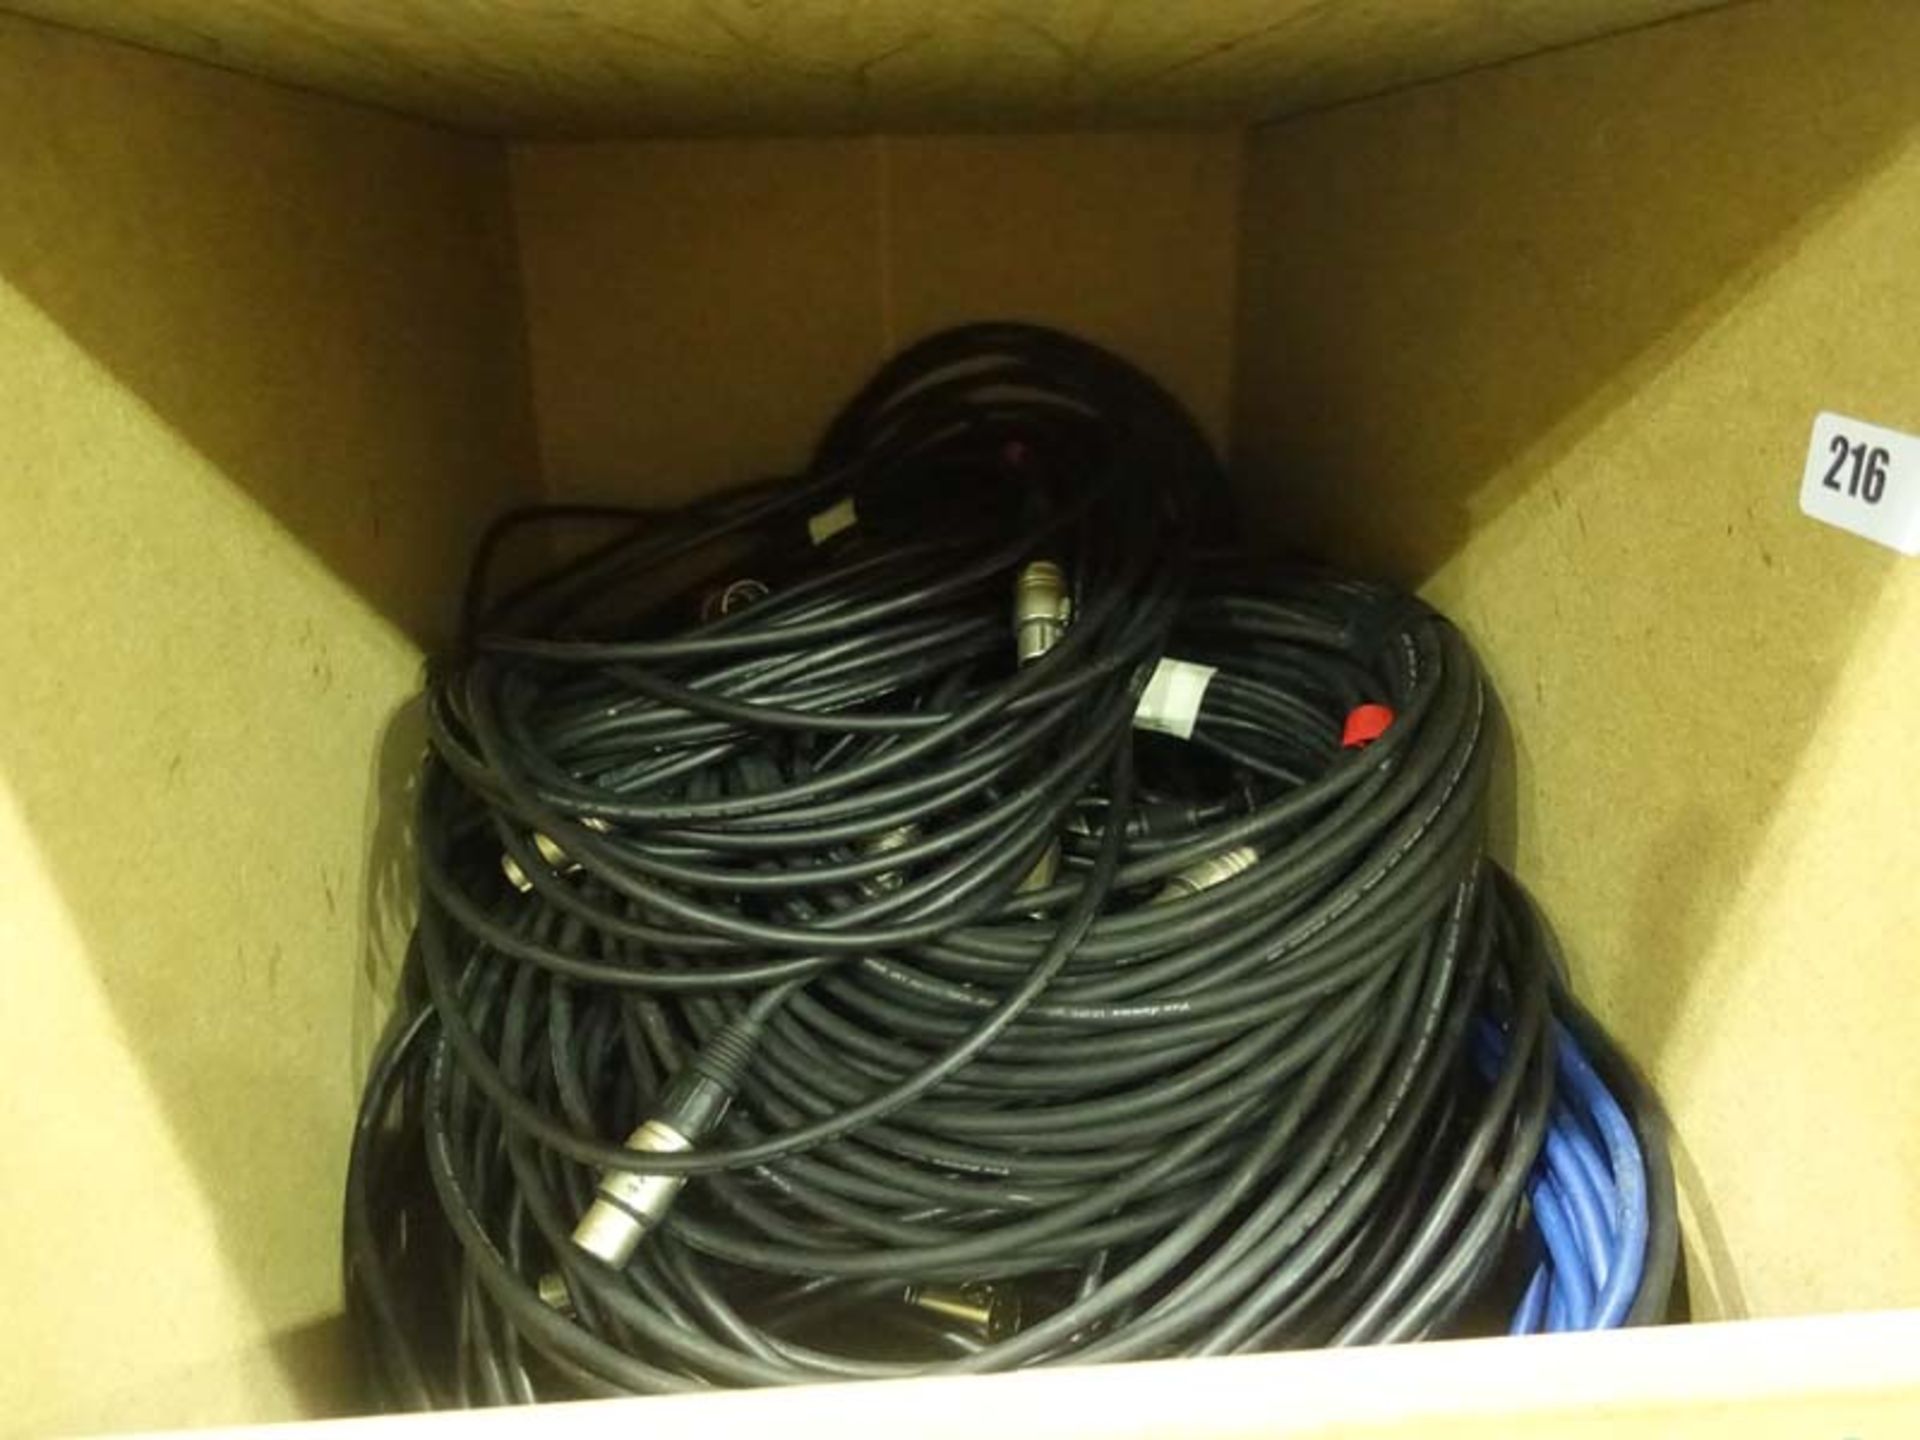 Crate containing 10 metre microphone cables